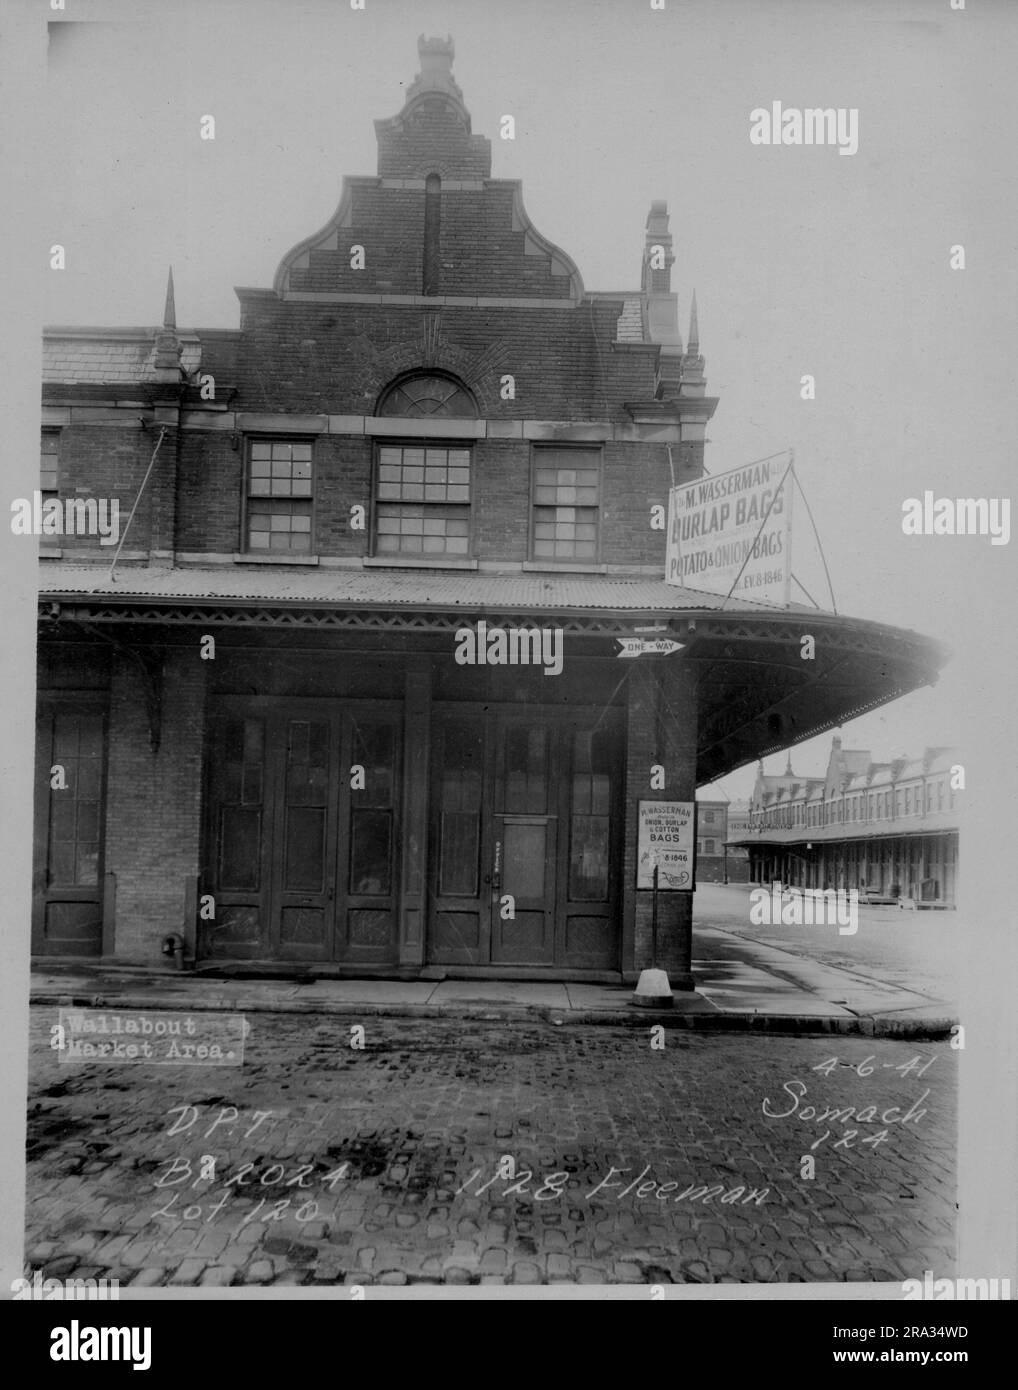 Photograph of exterior Wallabout Market, D.P. 7, Lot 120, Building 2024, 1128 Fleeman.. Architectural view of corner M. Wasserman Burlap Bags storefront, with other stores in background from negative 124.. Stock Photo